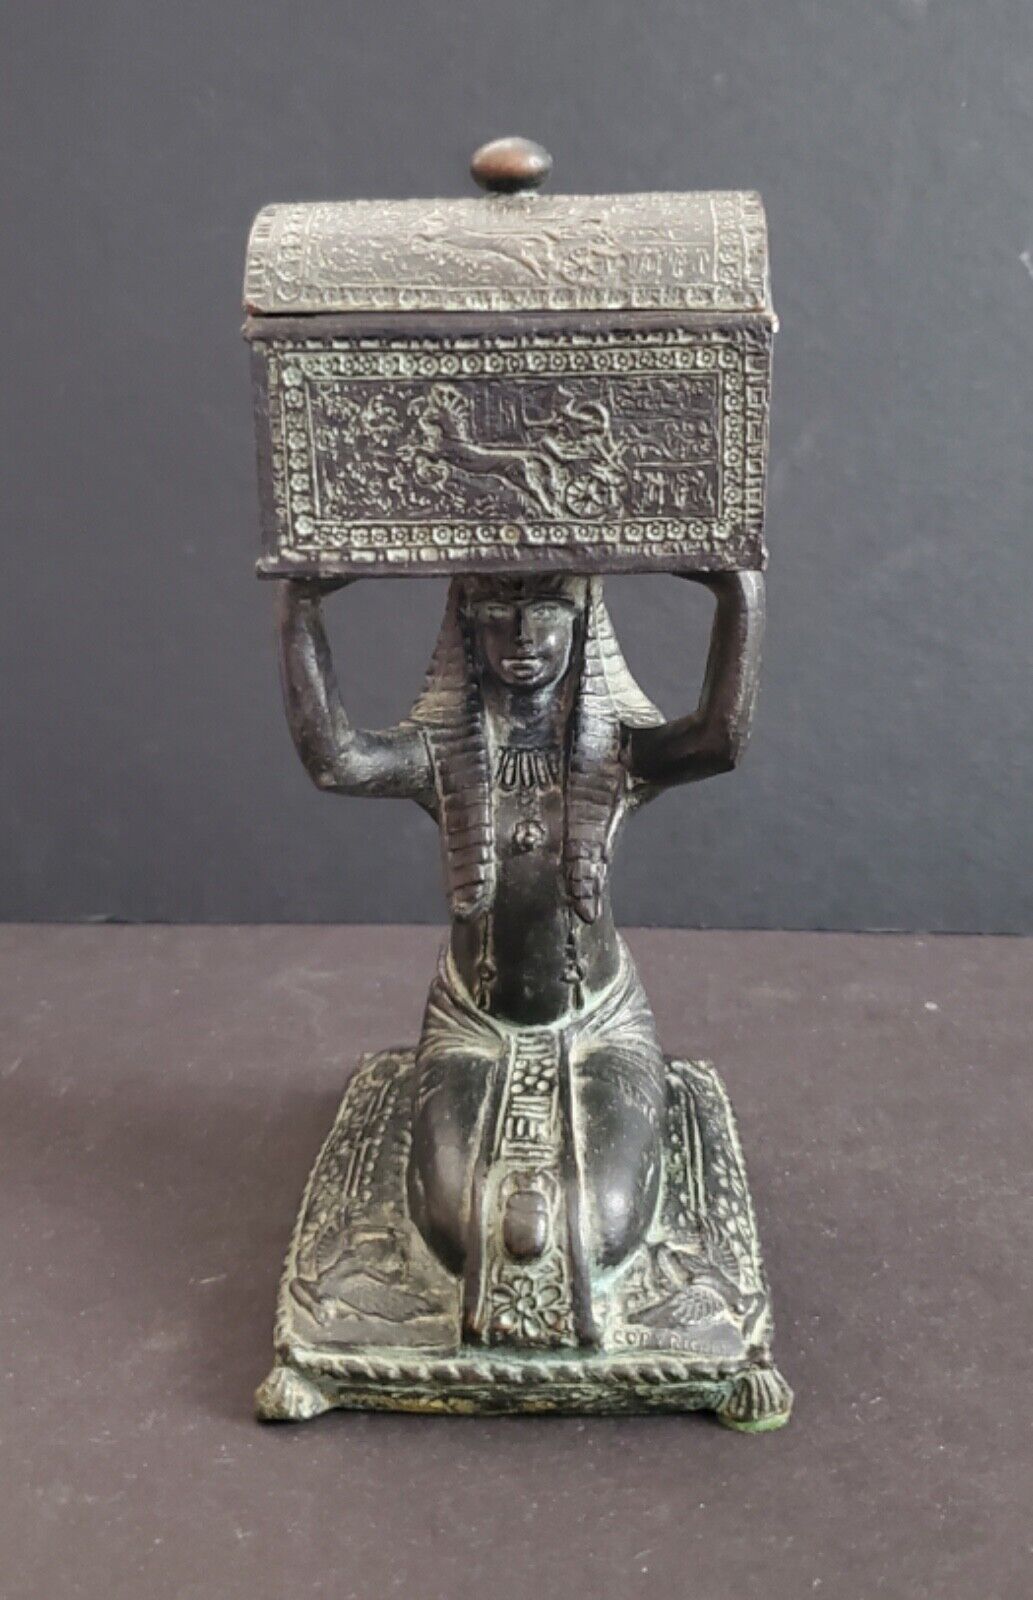 EARLY DECO EGYPTIAN REVIVAL GODDESS INTRICATE WEIDLICH BROTHERS CIGARETTE BOX